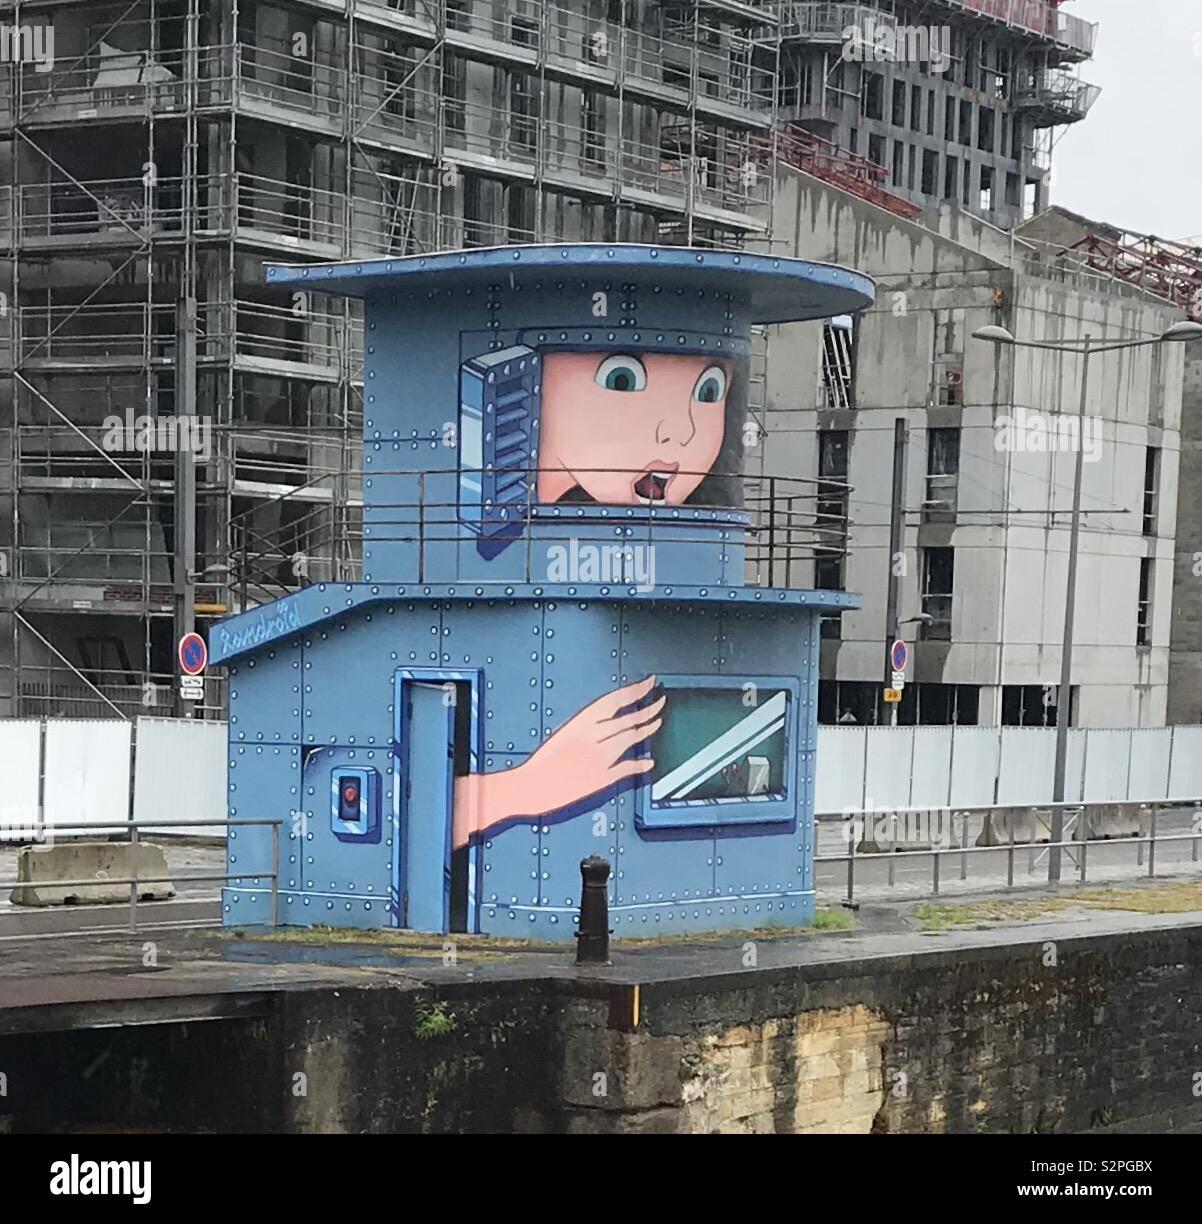 Lock gate building in Bordeaux looks like a person looking out of it Stock Photo